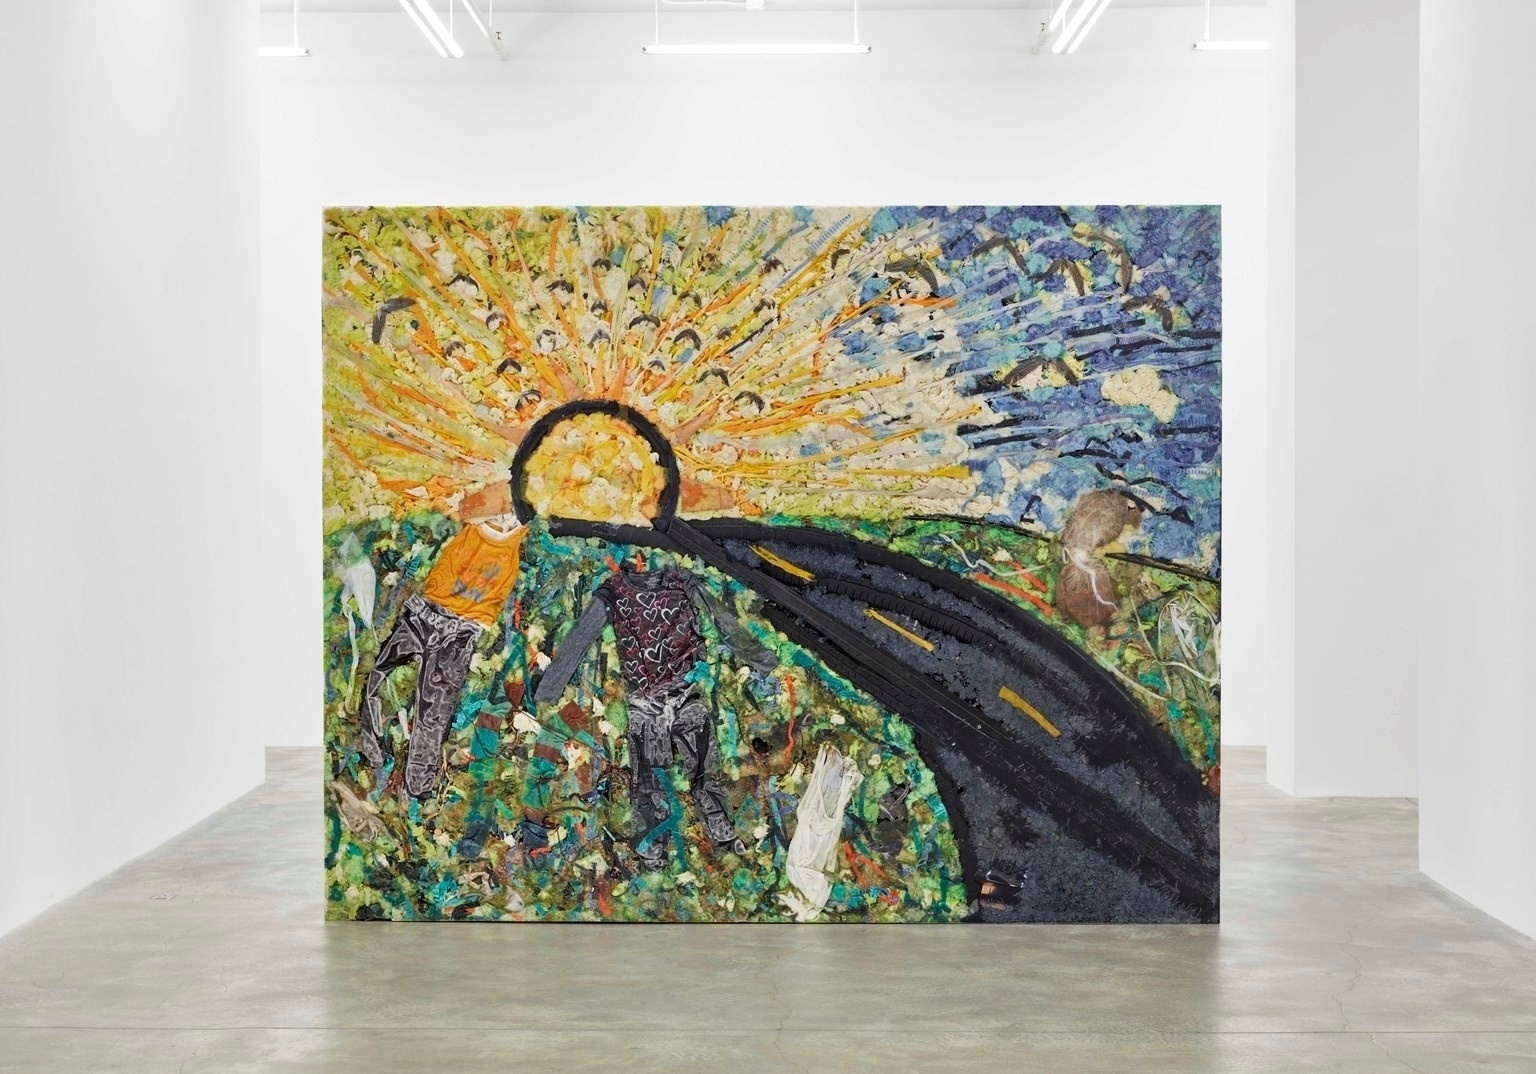 A black asphalt road cuts through a lush green hill and leads towards a glowing yellow sun outlined with a thick black circle. Yellow rays from the sun extend out into a blue sky. Two figures are situated in the field to the left of the road. The entire piece is intensely textured, created from mixed materials which include resin, Virginia soil, du-rags, rubber tires, and others.